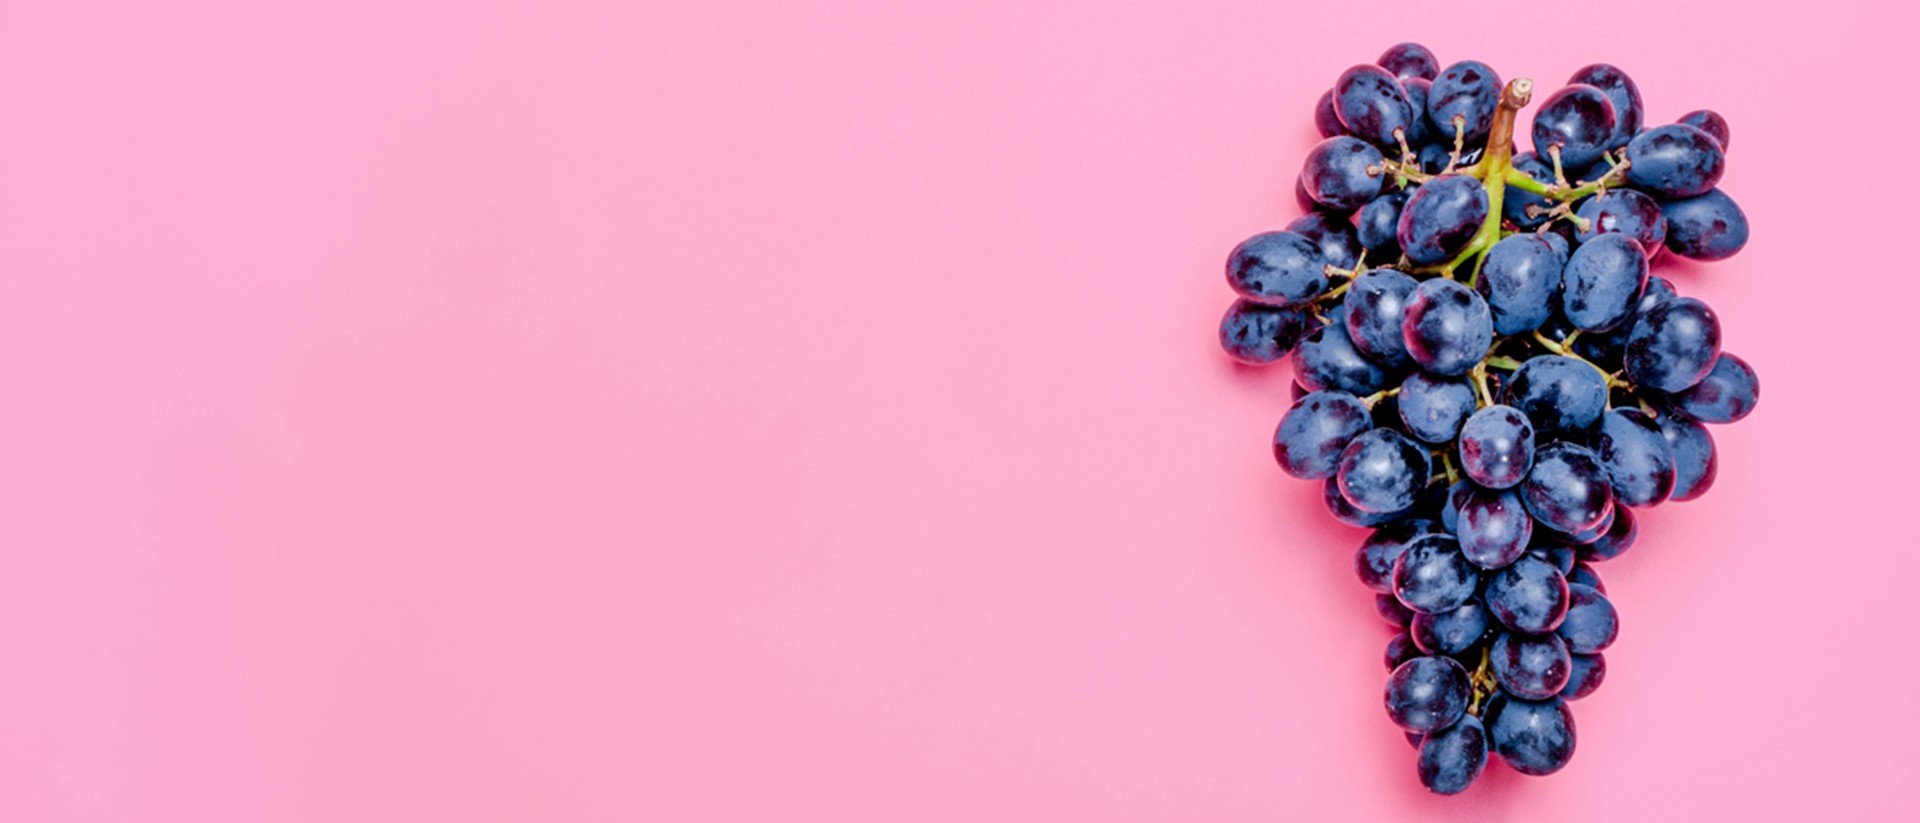 Image of black grapes against a pink background